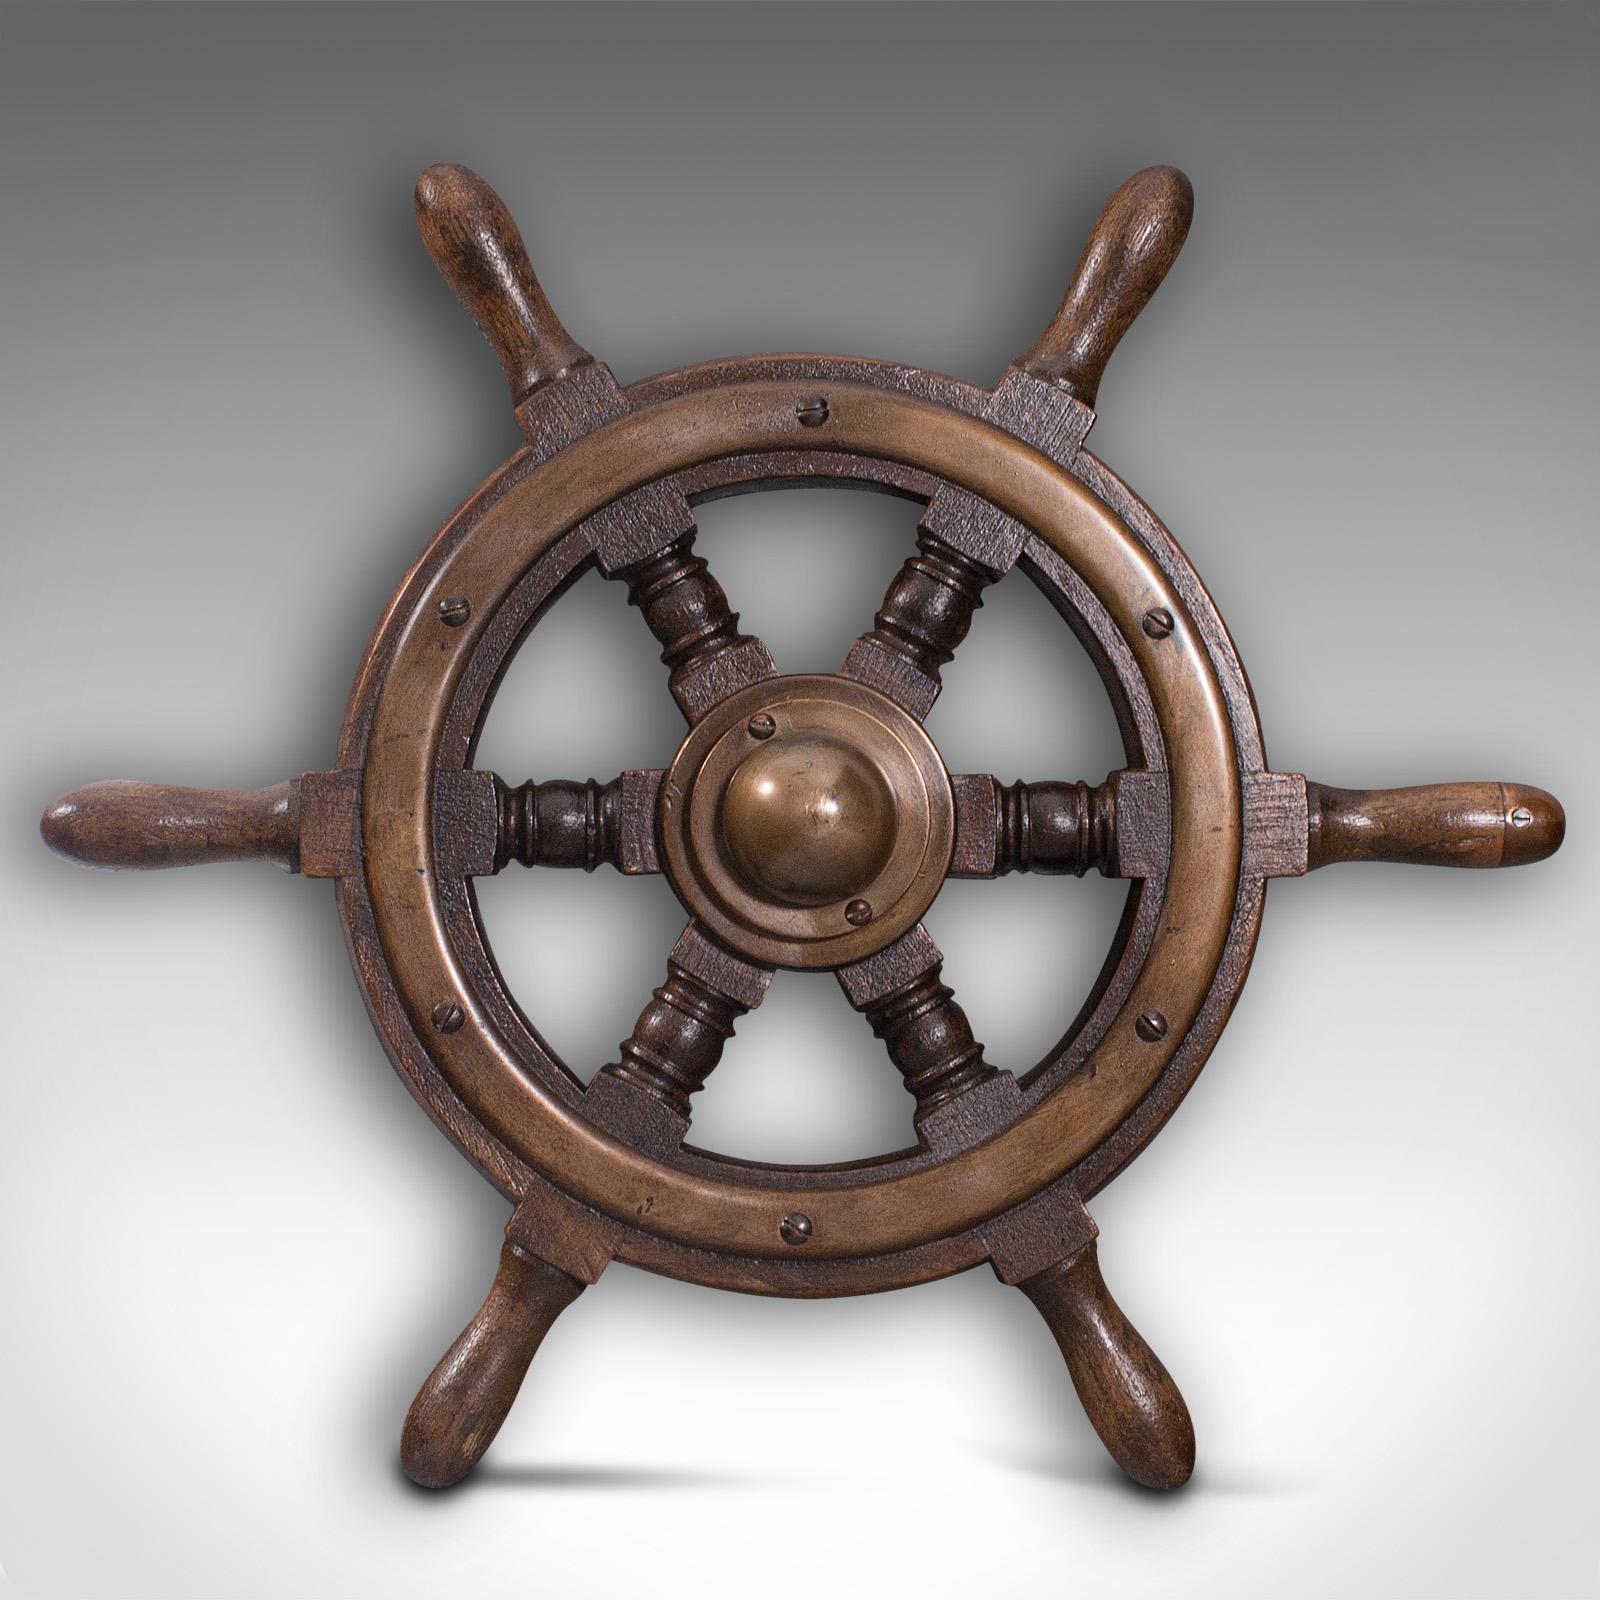 This is a small antique ship's wheel. An English, teak and bronze maritime decorative helm, dating to the early 20th century, circa 1920

Delightful example with maritime appeal
Displays a desirable aged patina throughout
Solid teak shows fine